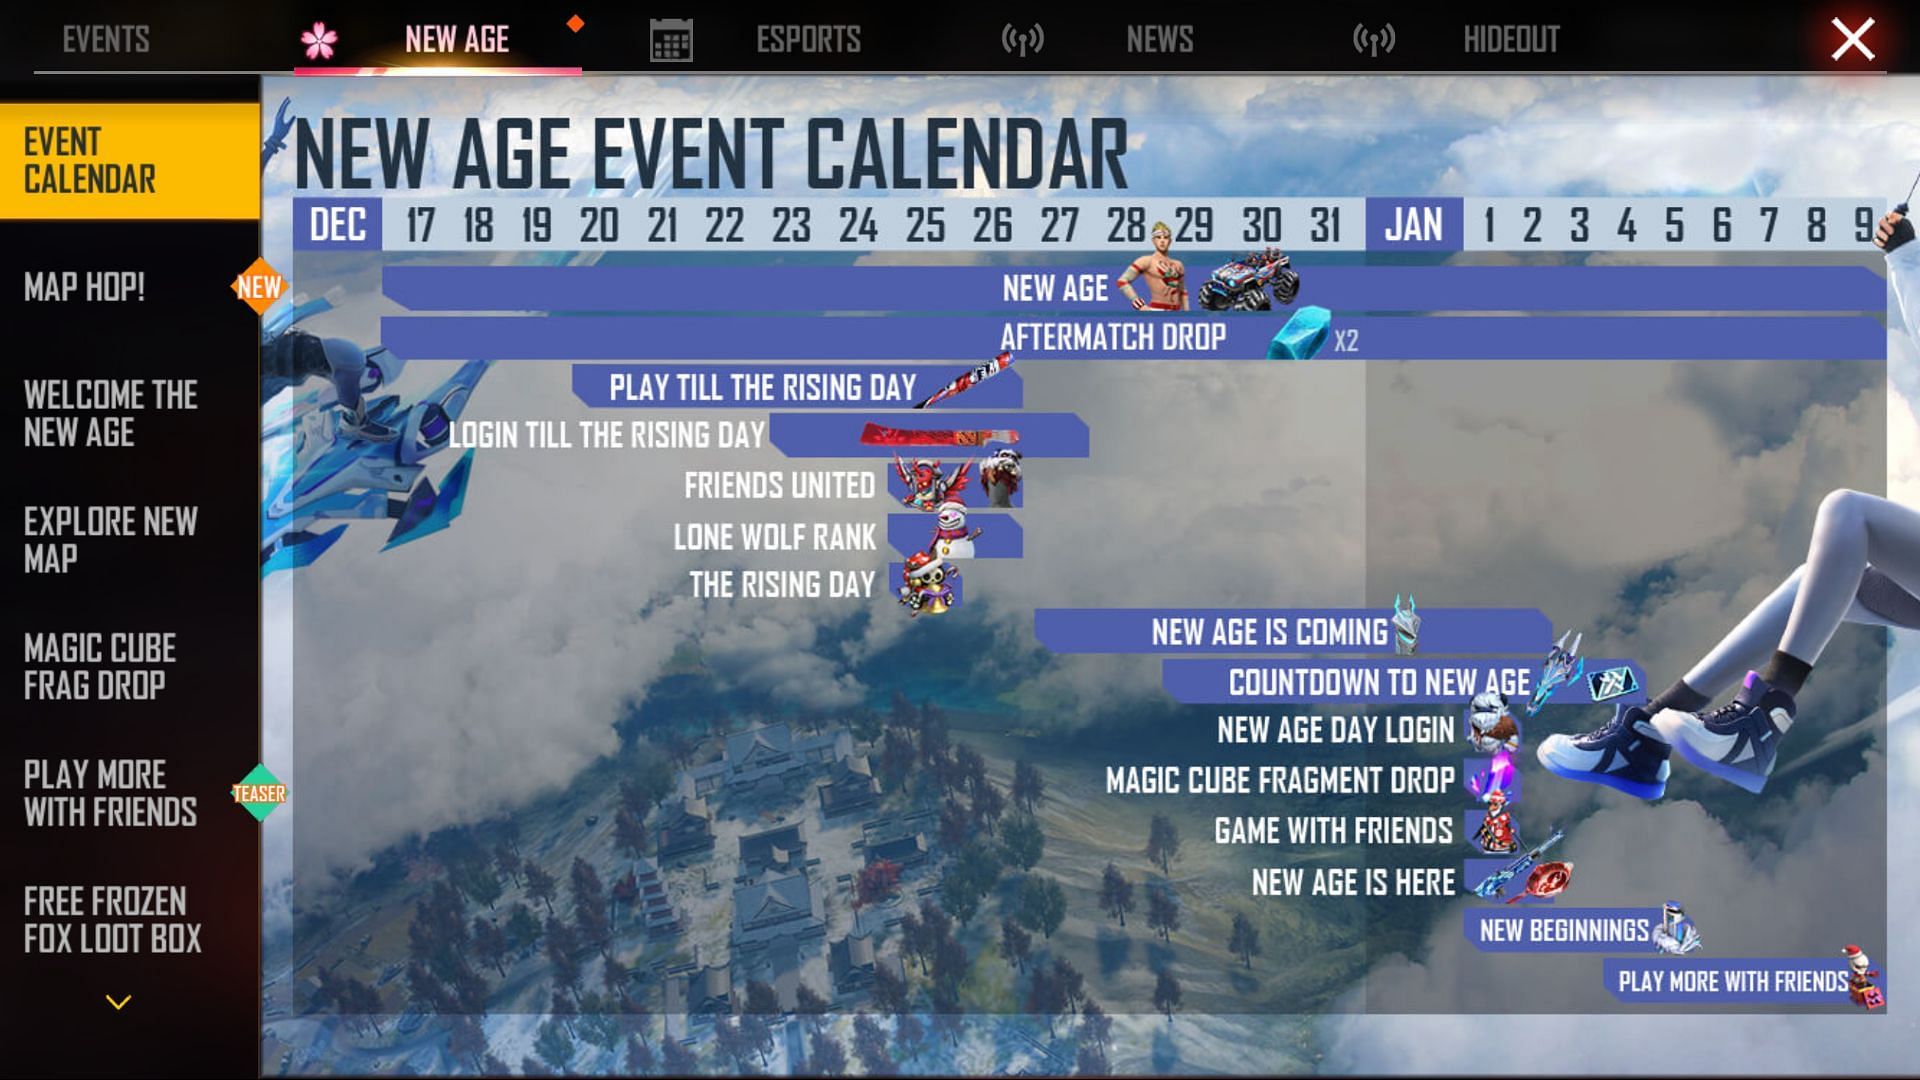 Events based on New Age are running in-game (Image via Free Fire)